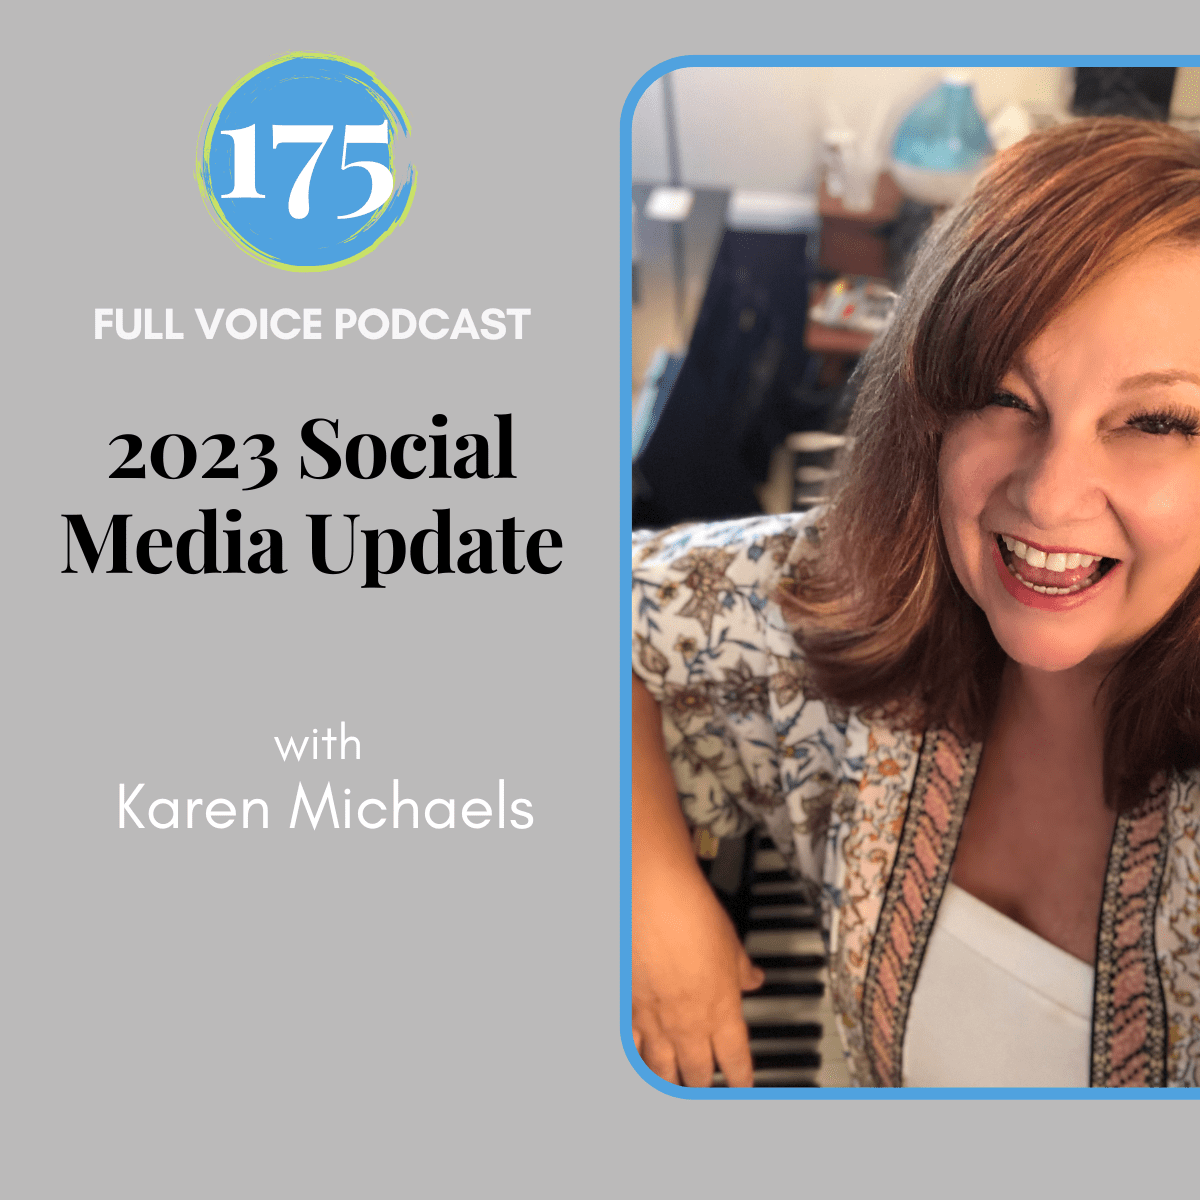 FULL VOICE Podcast Episode 175 with Karen Michaels